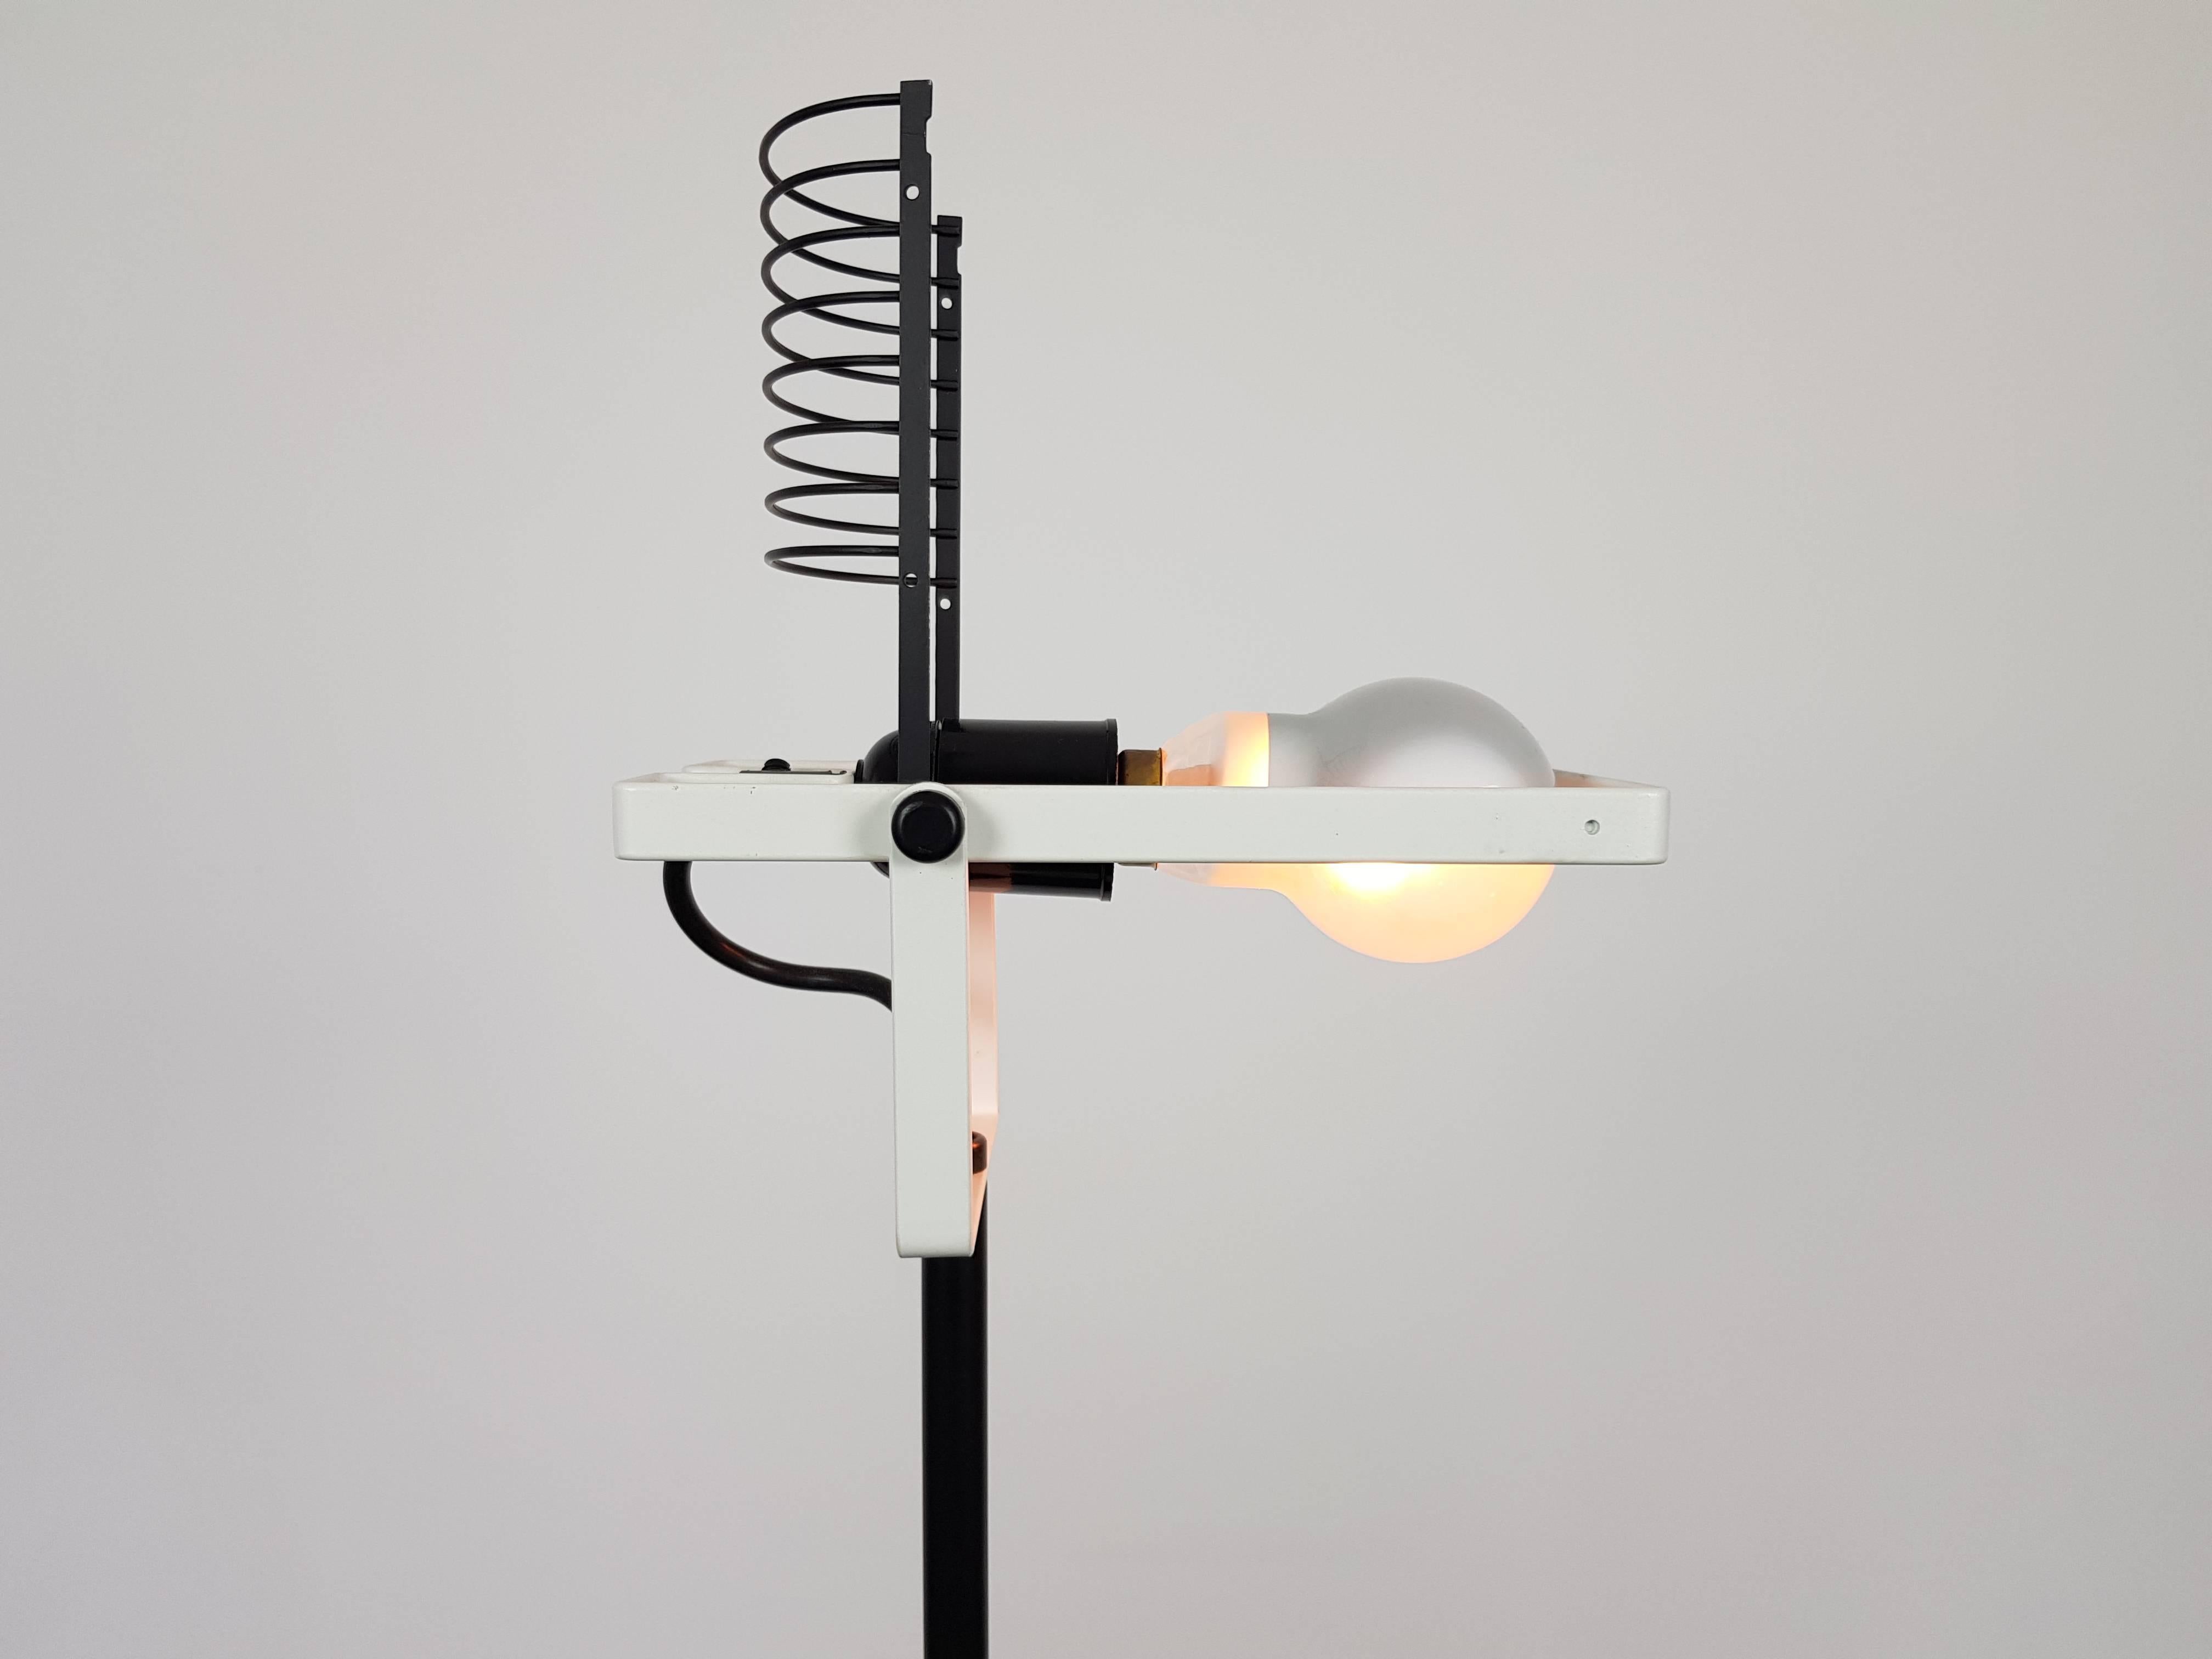 A rare first edition Ernesto Gismondi Sintesi Terra white lacquered floor lamp, first edition with Cornalux bulb.
 
The lamp was designed in 1975 by Ernesto Gismondi for Artemide, later editions had an aluminium hood instead of the Cornalux bulb as